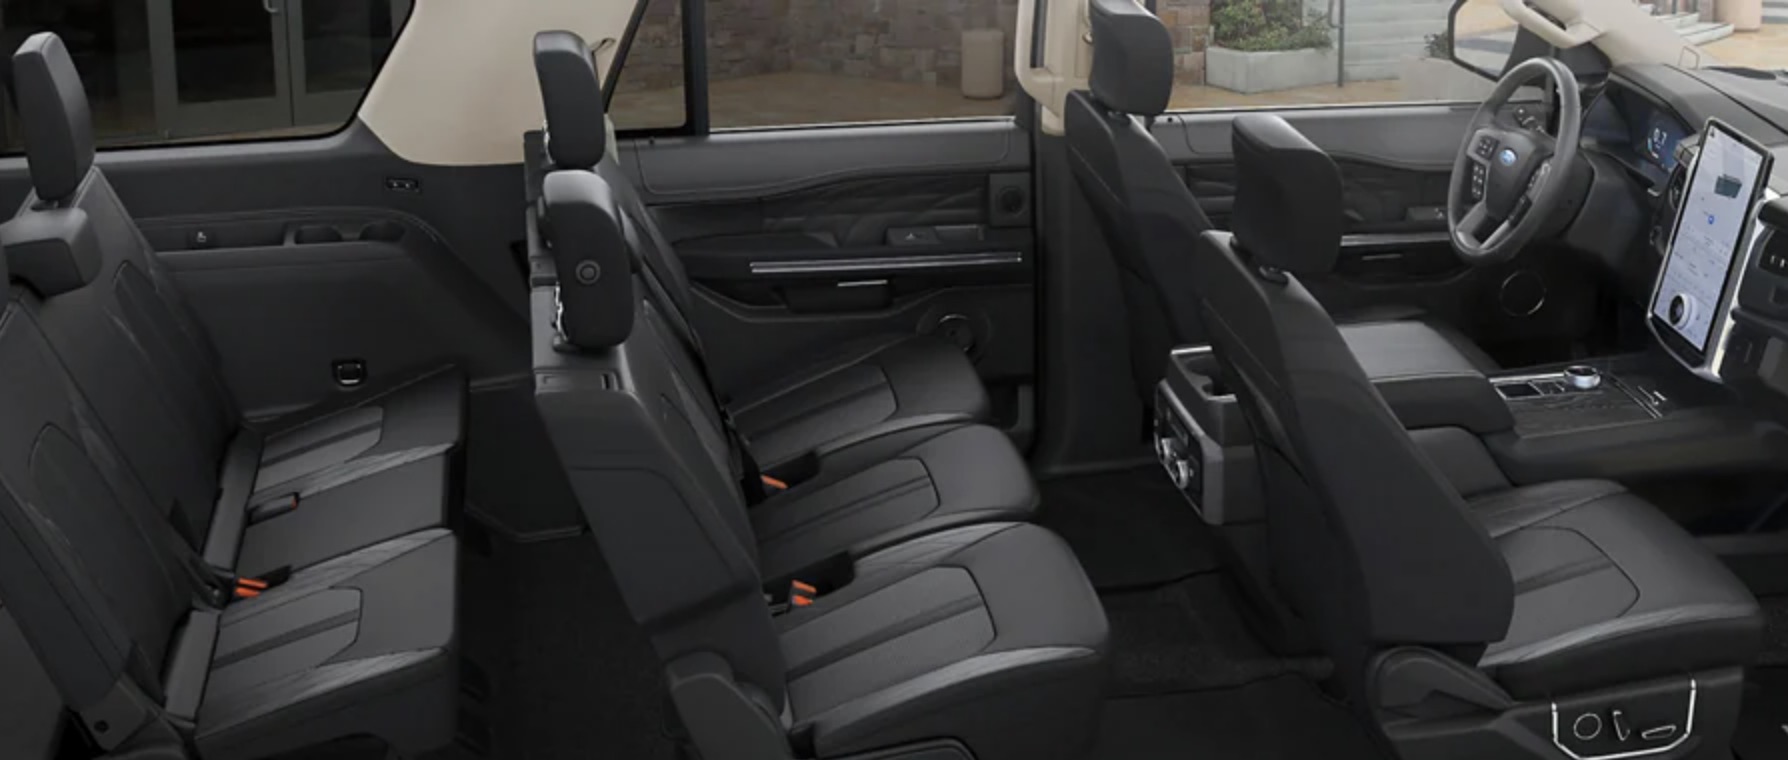 The 2022 Ford Expedition Offers Seating For Long Road Trips